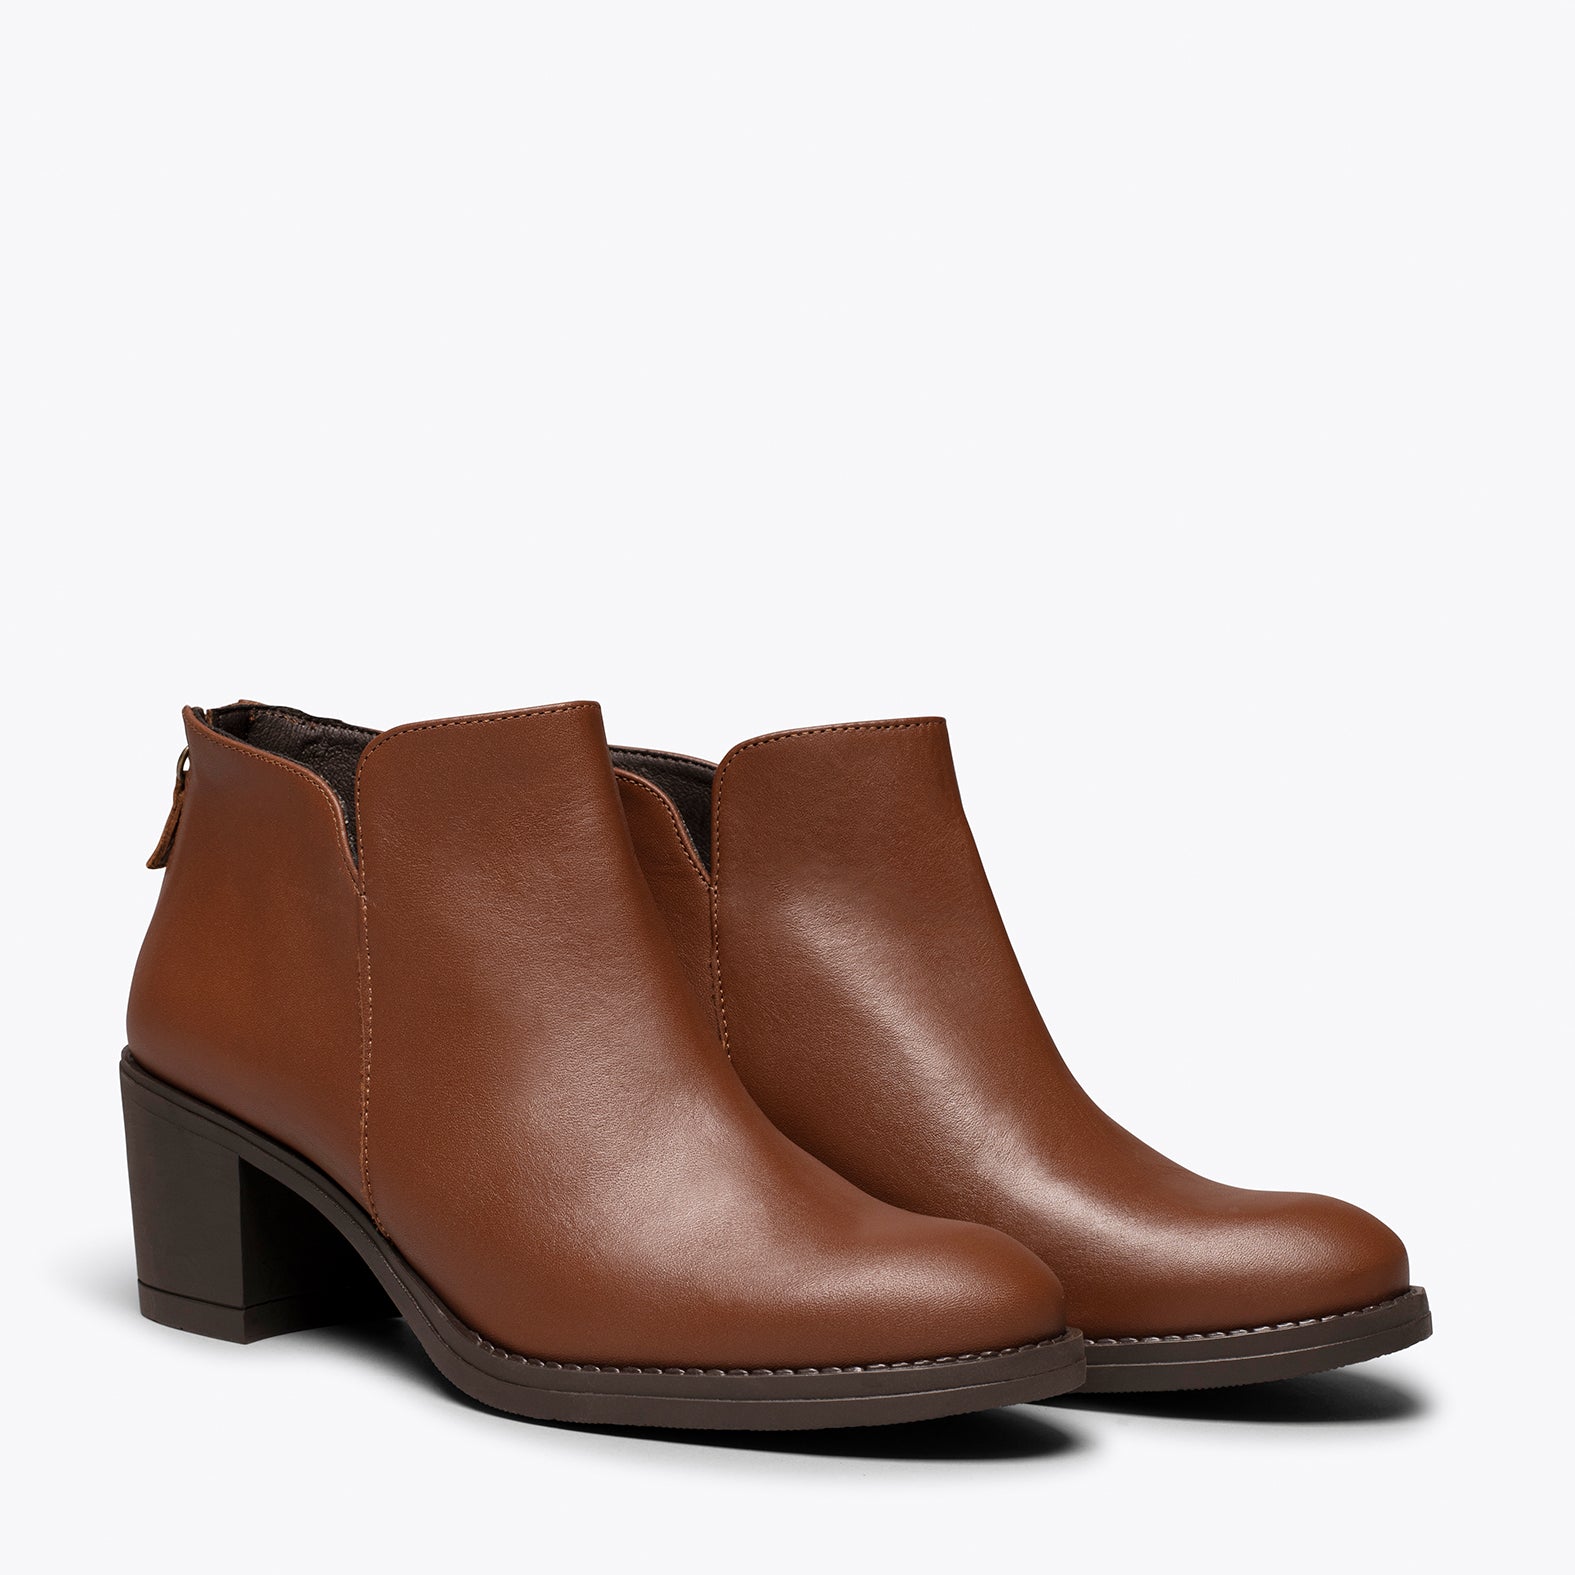 LOOK – CAMEL classic leather bootie